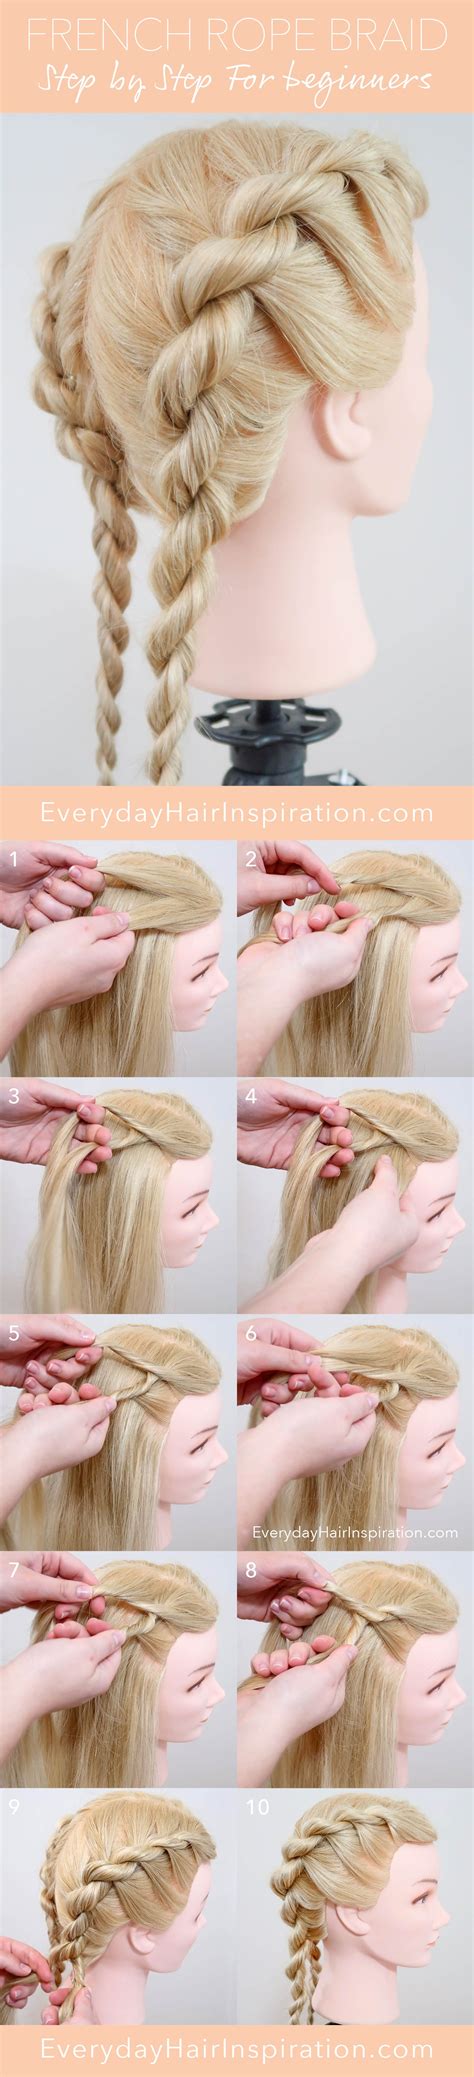 Apr 24, 2021 · step 3: French Rope Braid Step by Step - Everyday Hair inspiration